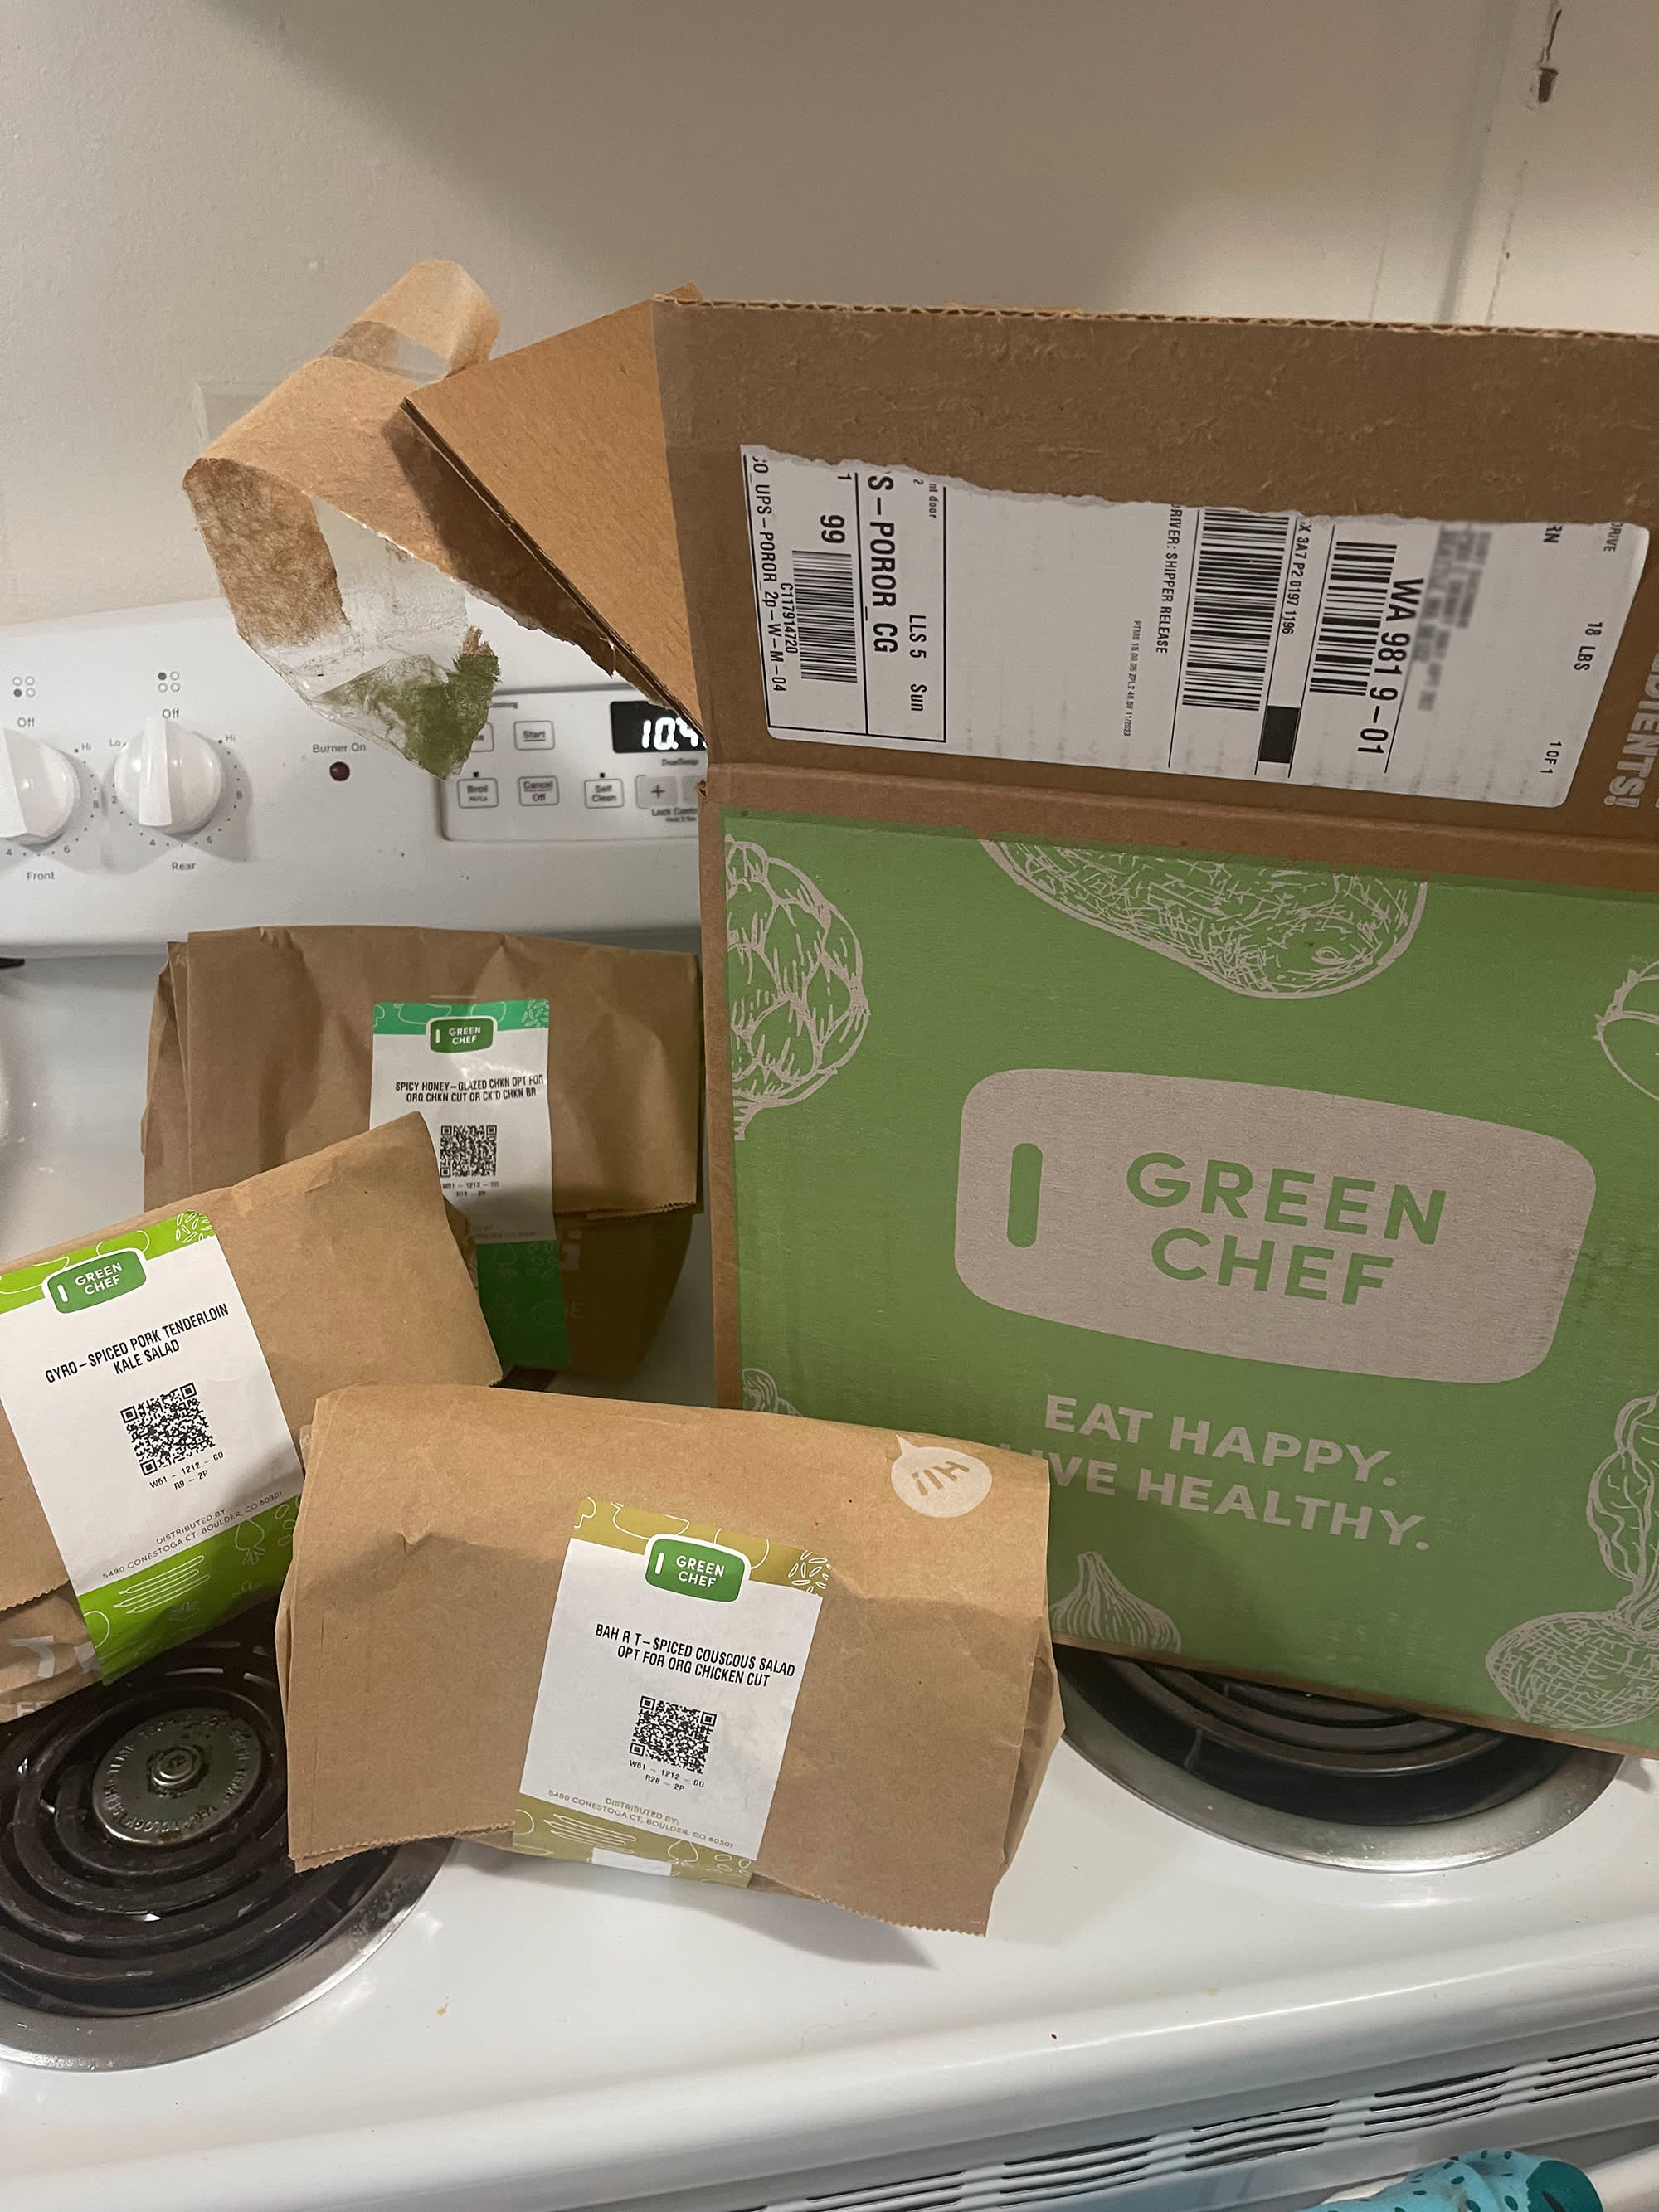 Green Chef Review 2023: Is It Worth the Cost?